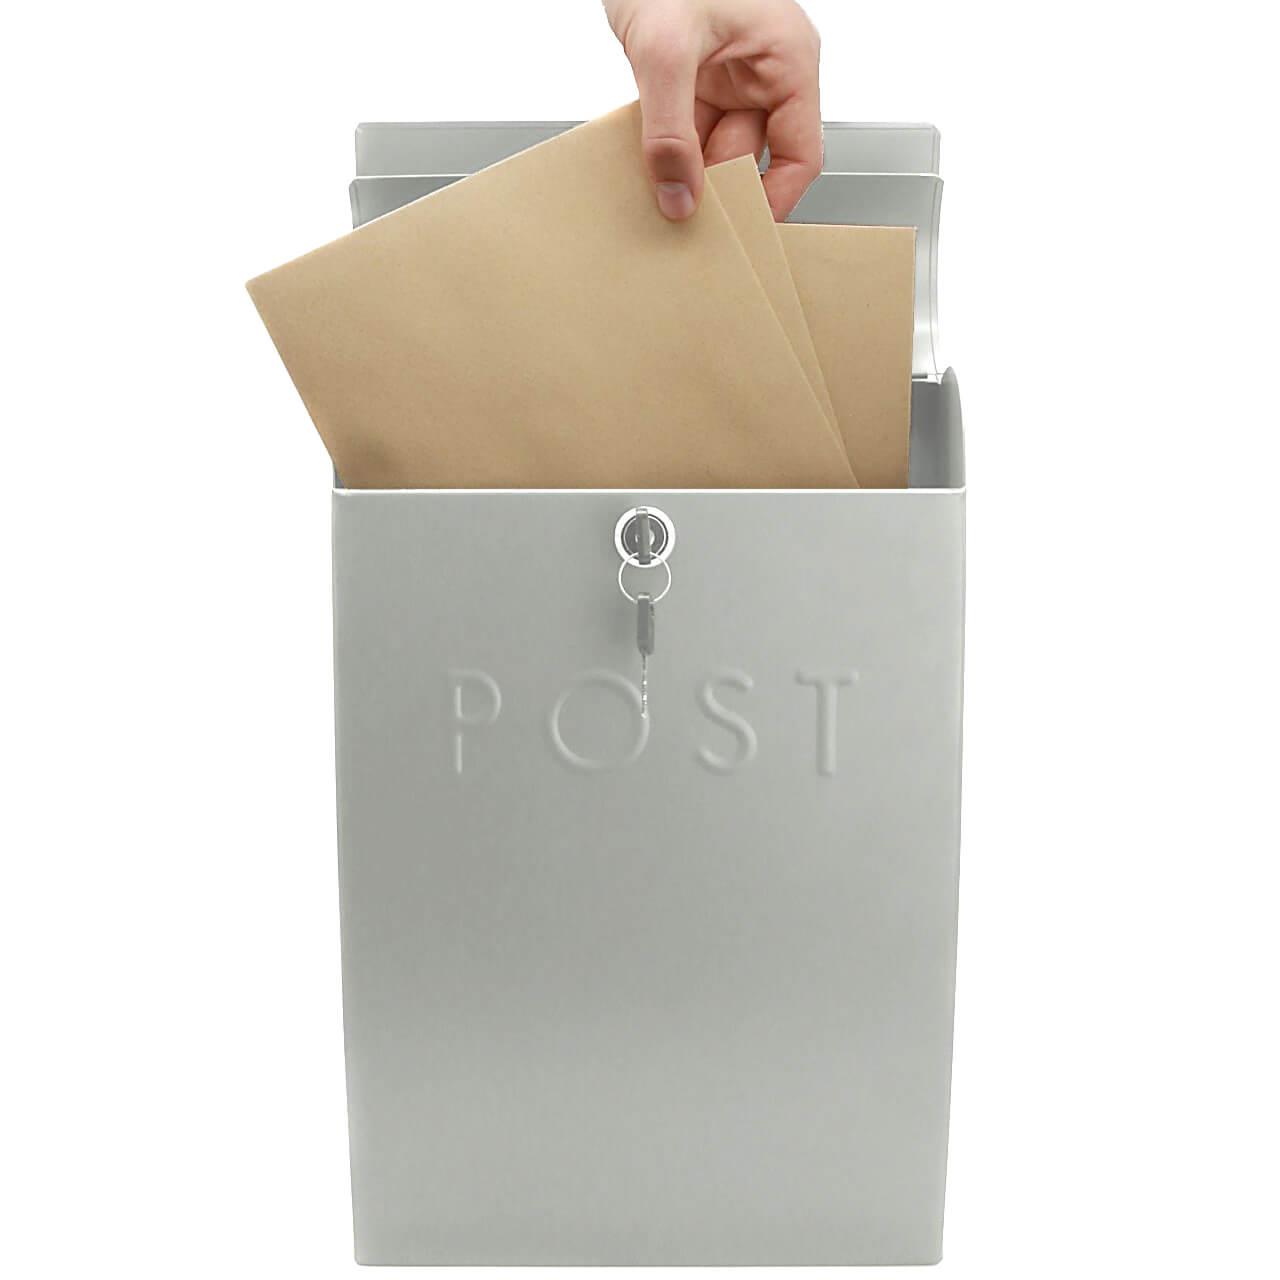 Wall Mounted Post Box in White | M&W